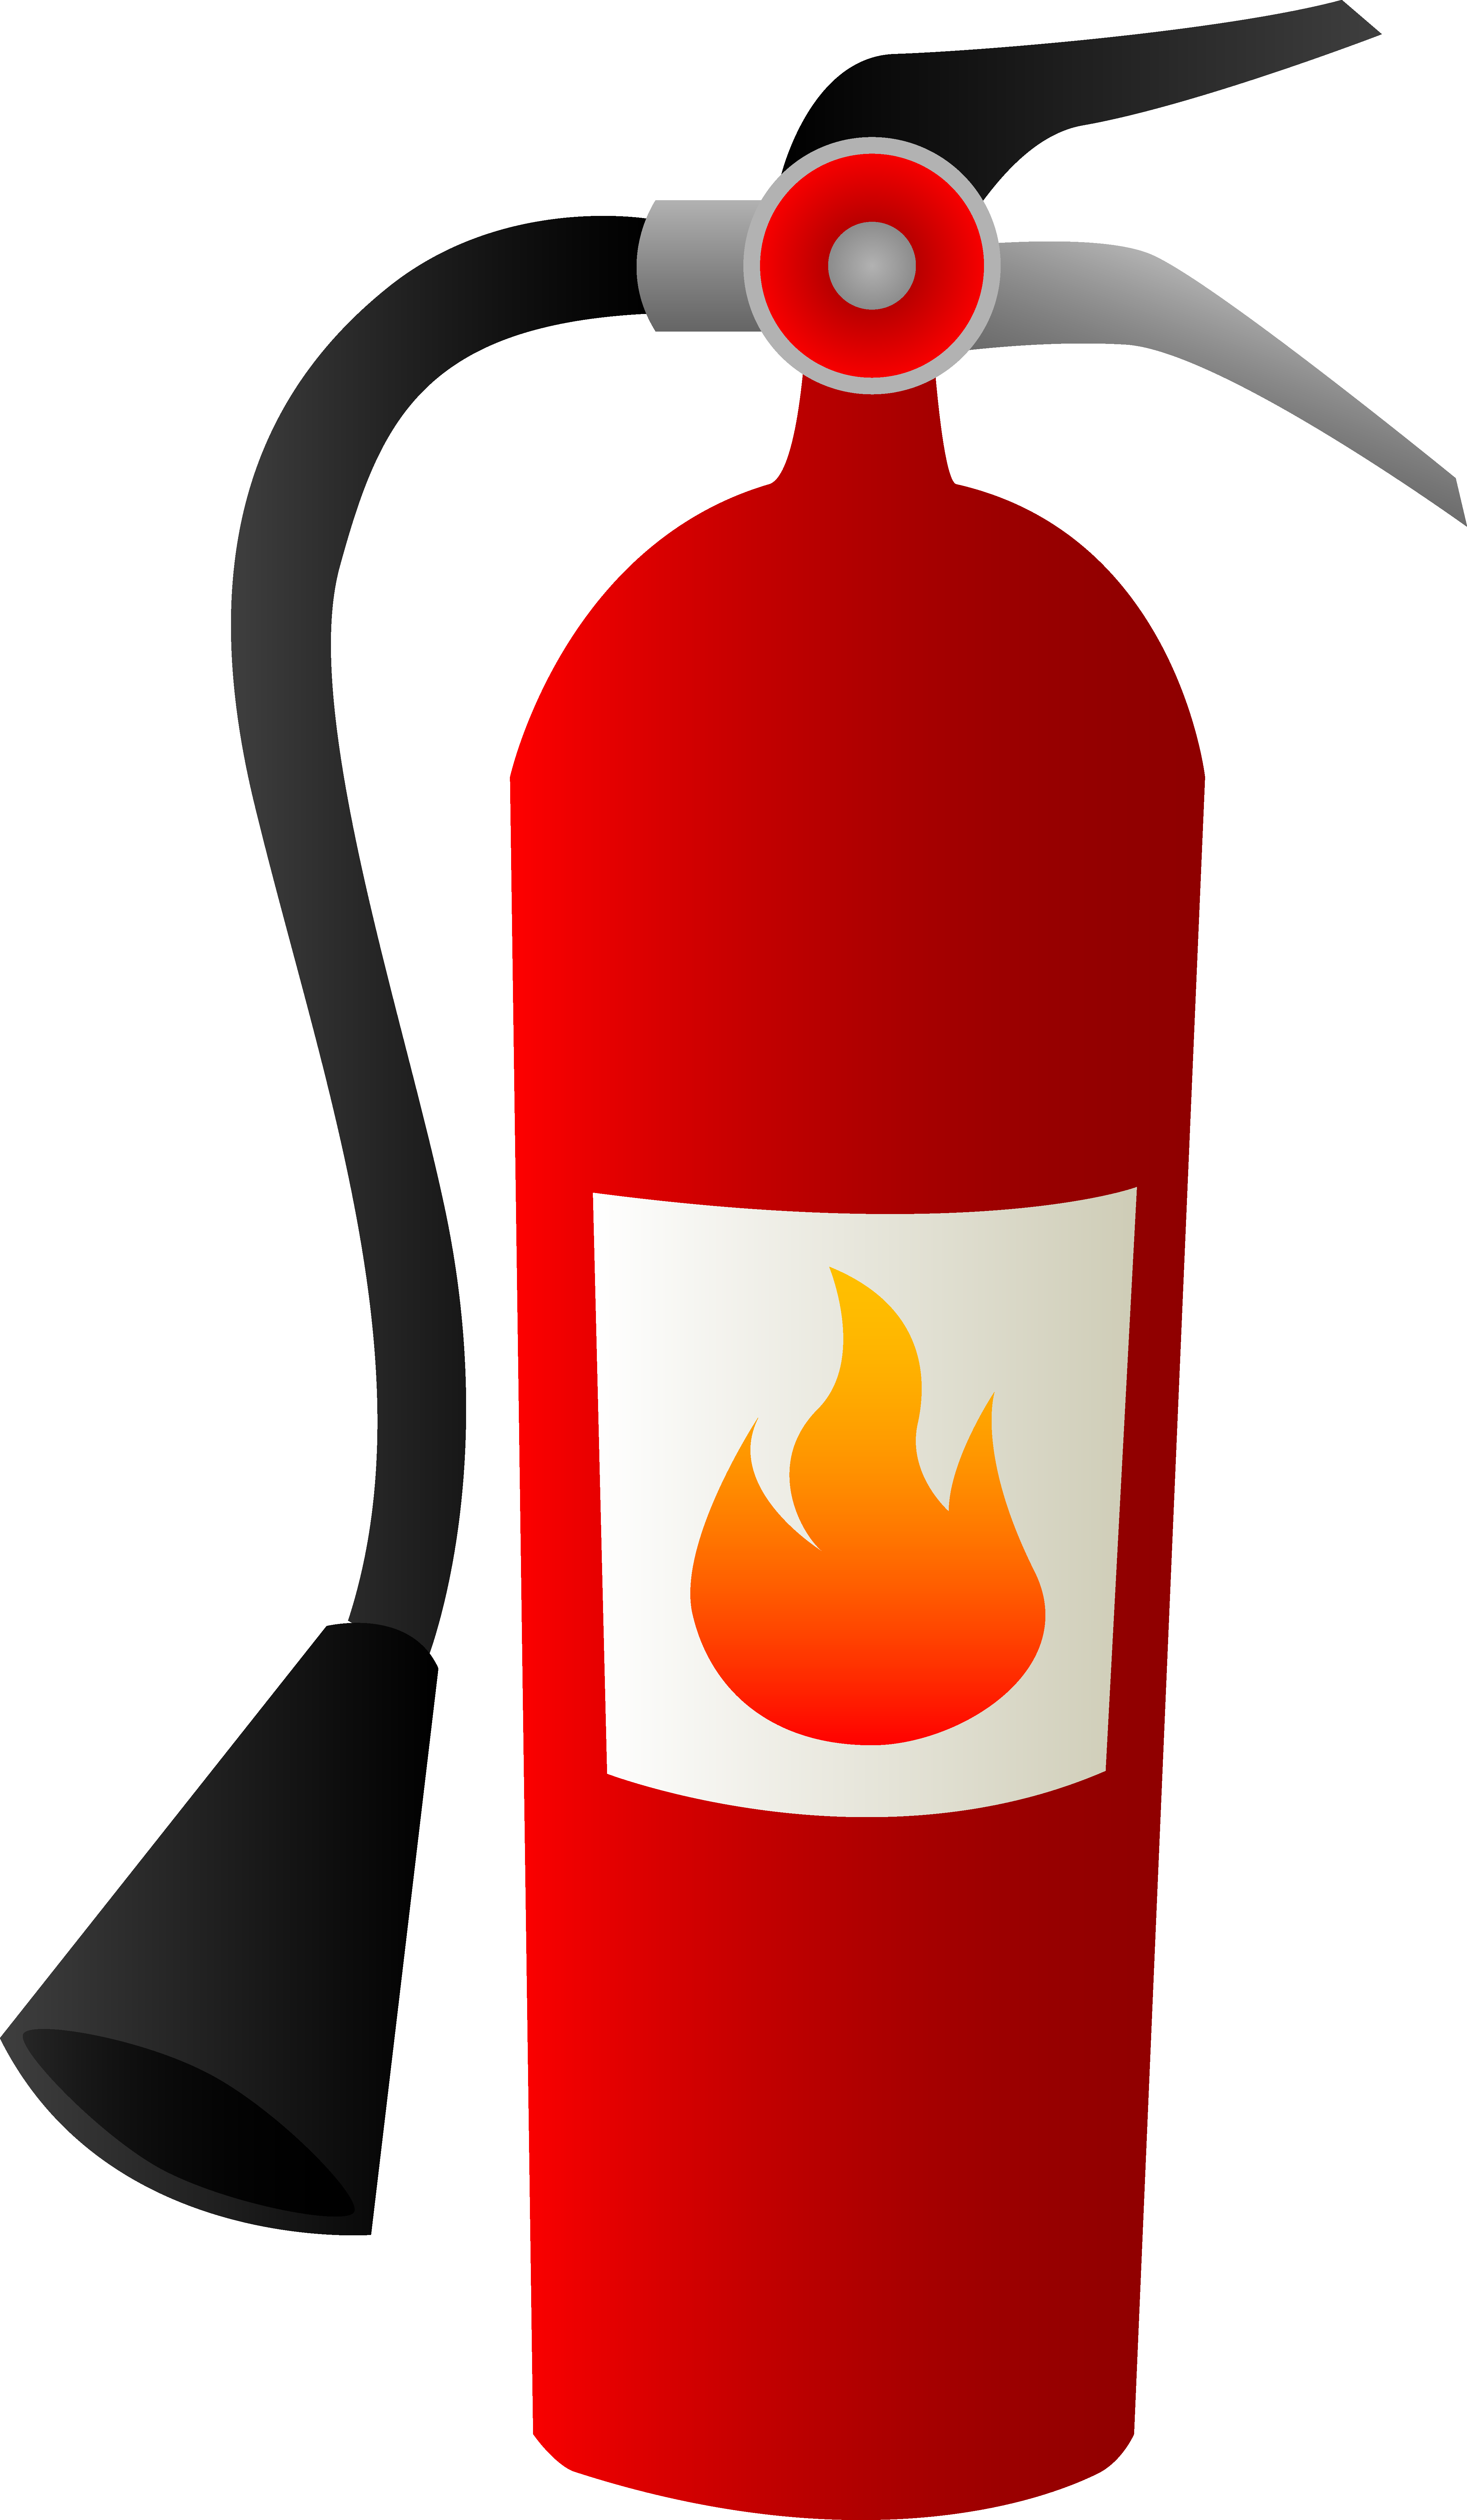 Fire extinguisher icon clipart